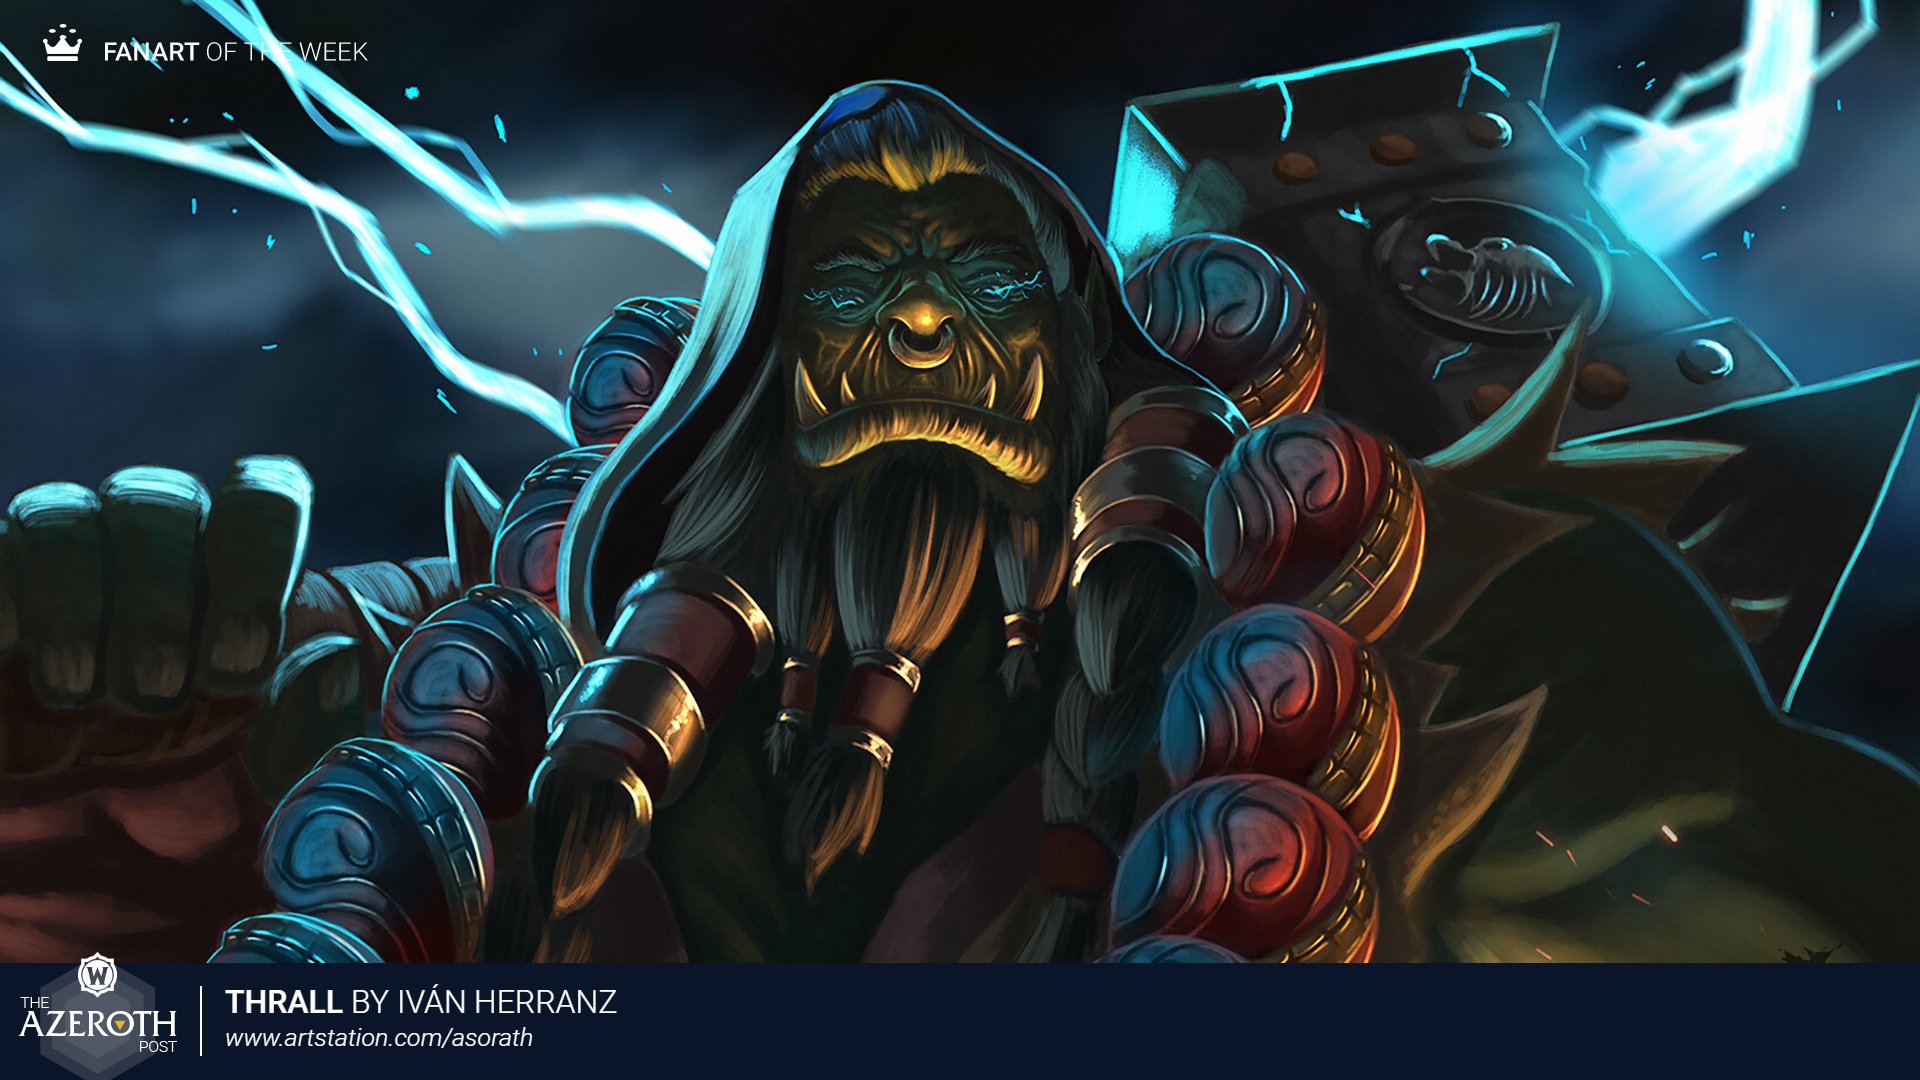 coping Diplomatiske spørgsmål Appel til at være attraktiv azerothpost 💙 - World of Warcraft news on Twitter: "Thrall by  @ivan_herranz_art. Follow this amazingly talented artist to view the full  version, to see more art and to order your own at